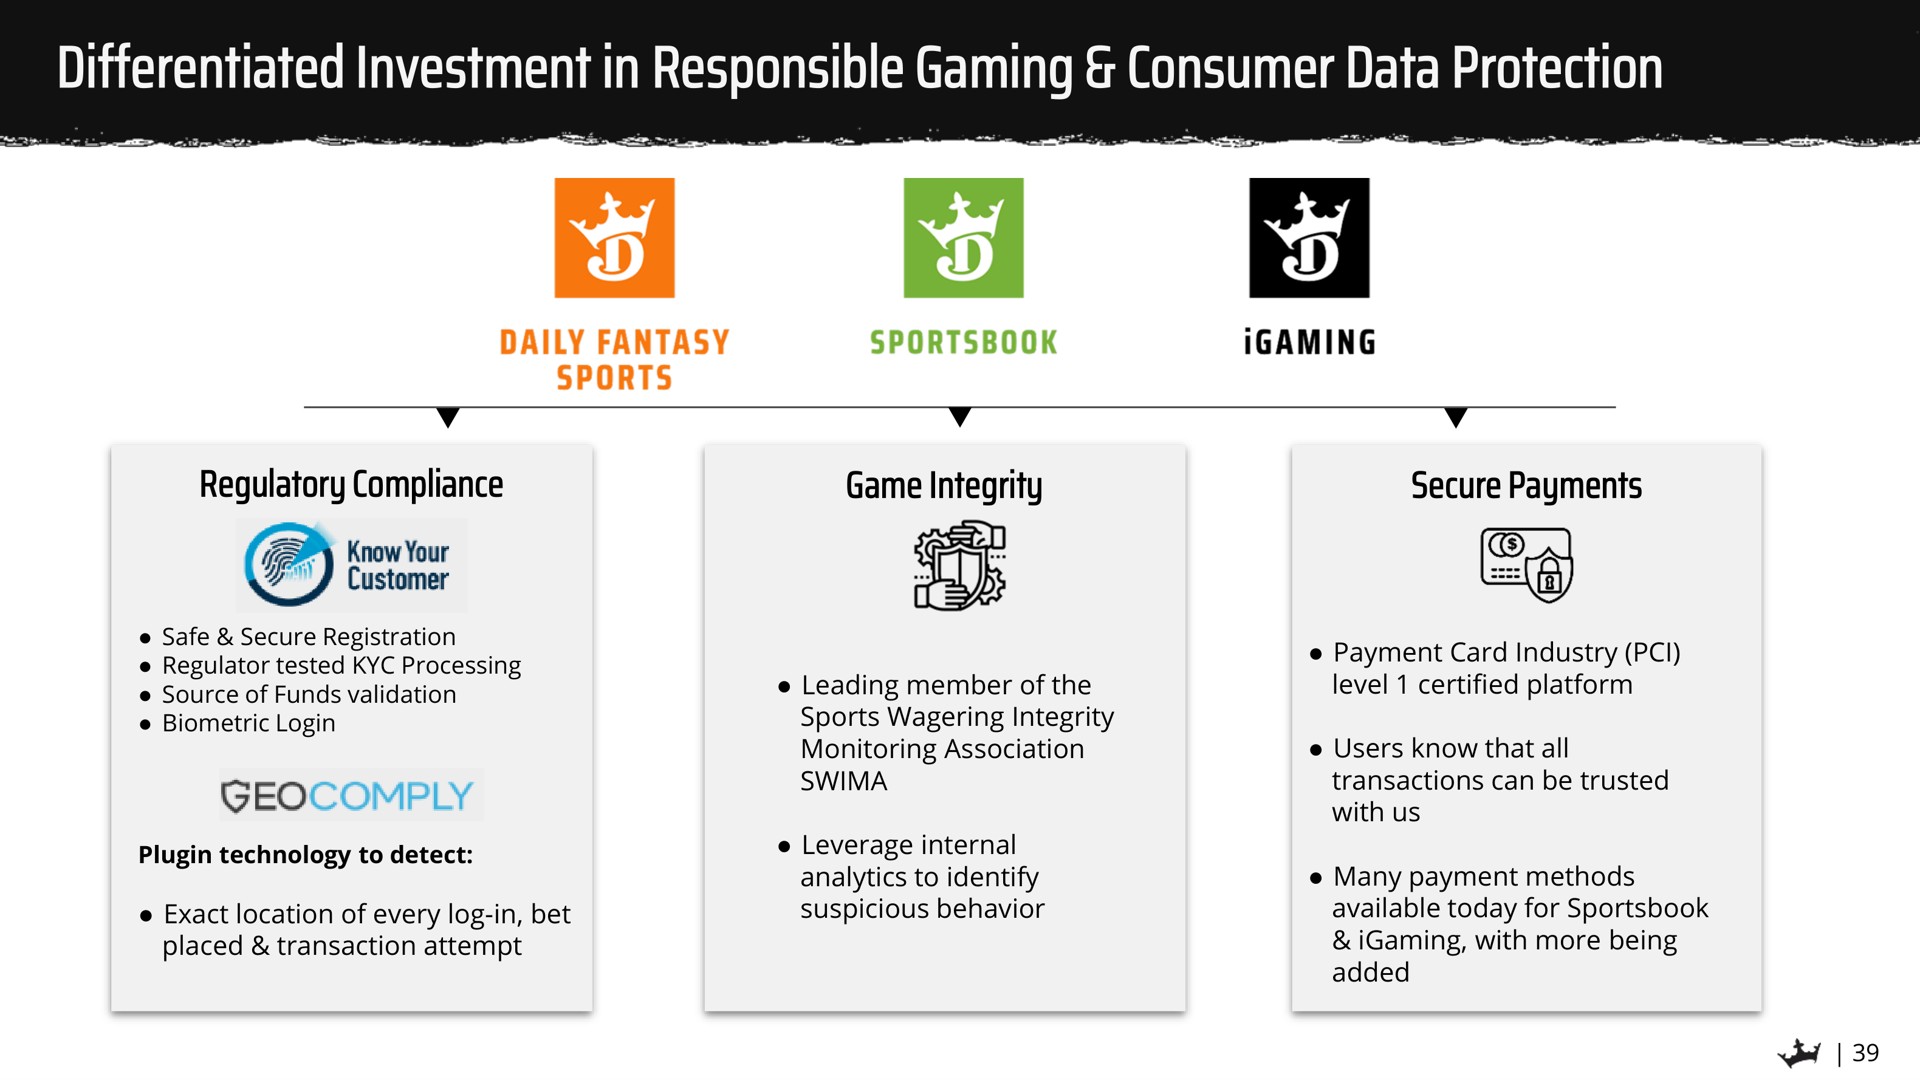 differentiated investment in responsible gaming consumer data protection vaccine man a onto mace cay | DraftKings